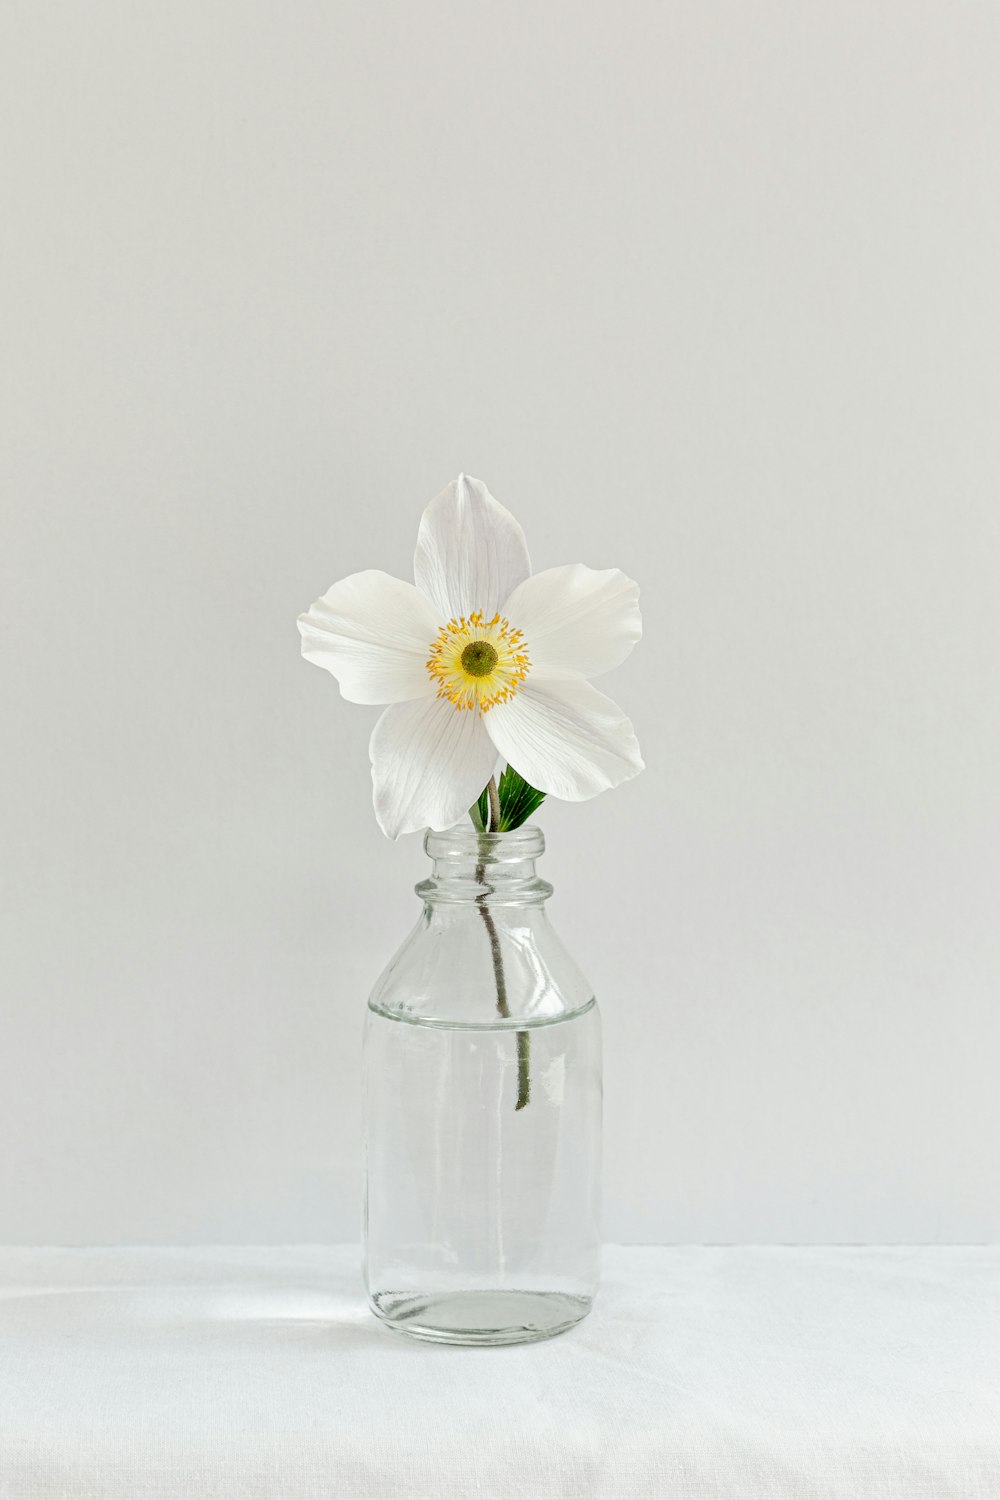 a single white flower in a clear glass vase